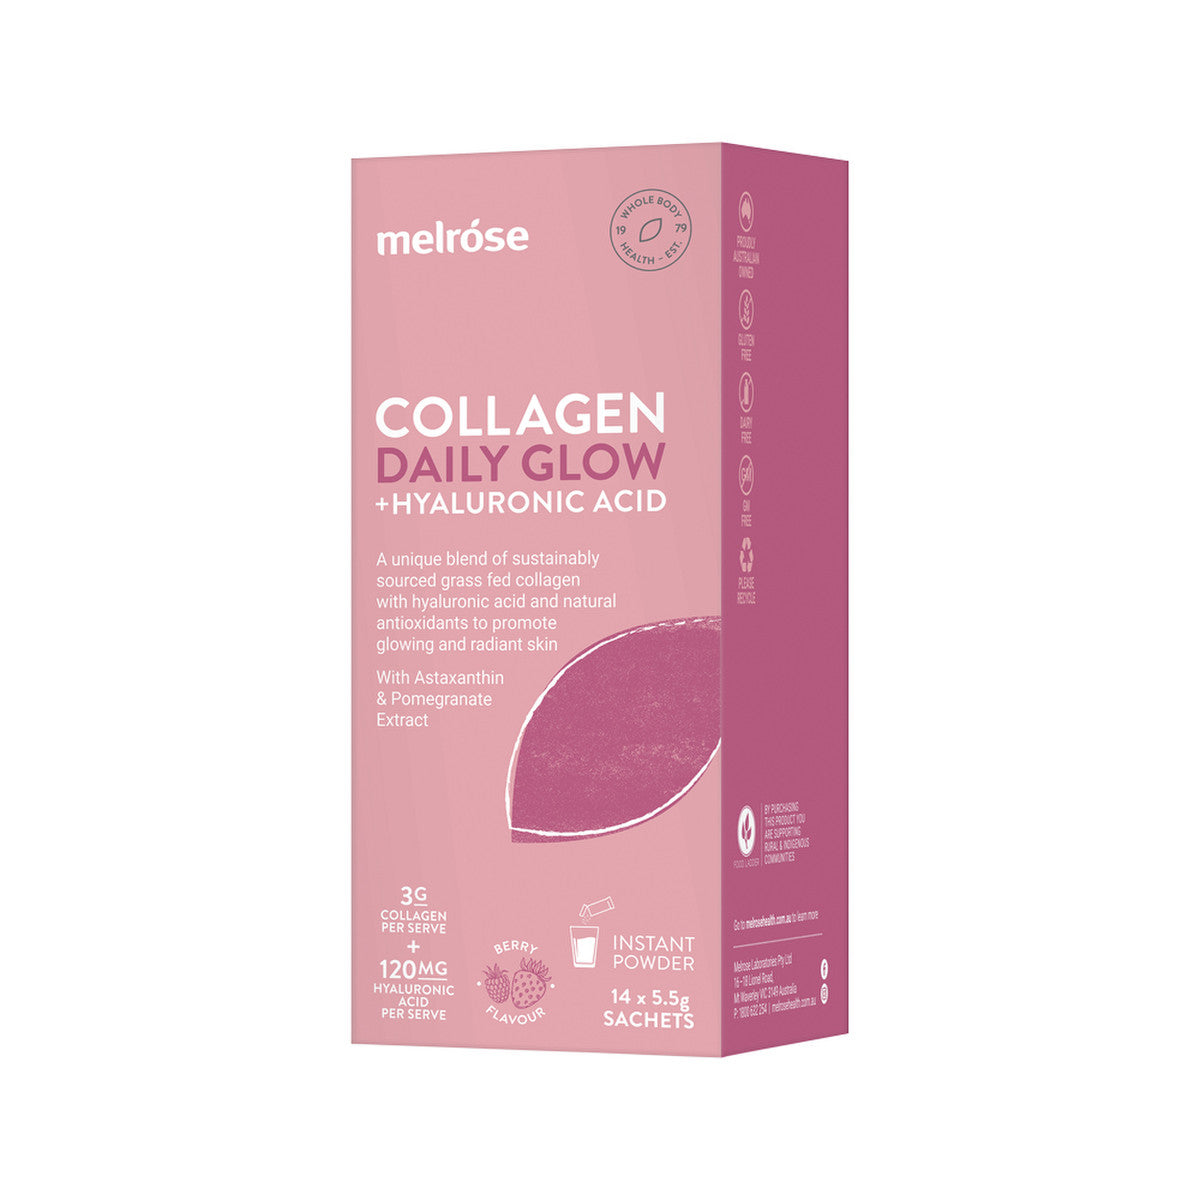 Melrose - Collagen Daily Glow + Hyaluronic Acid Berry Flavour Instant Powder Sachets